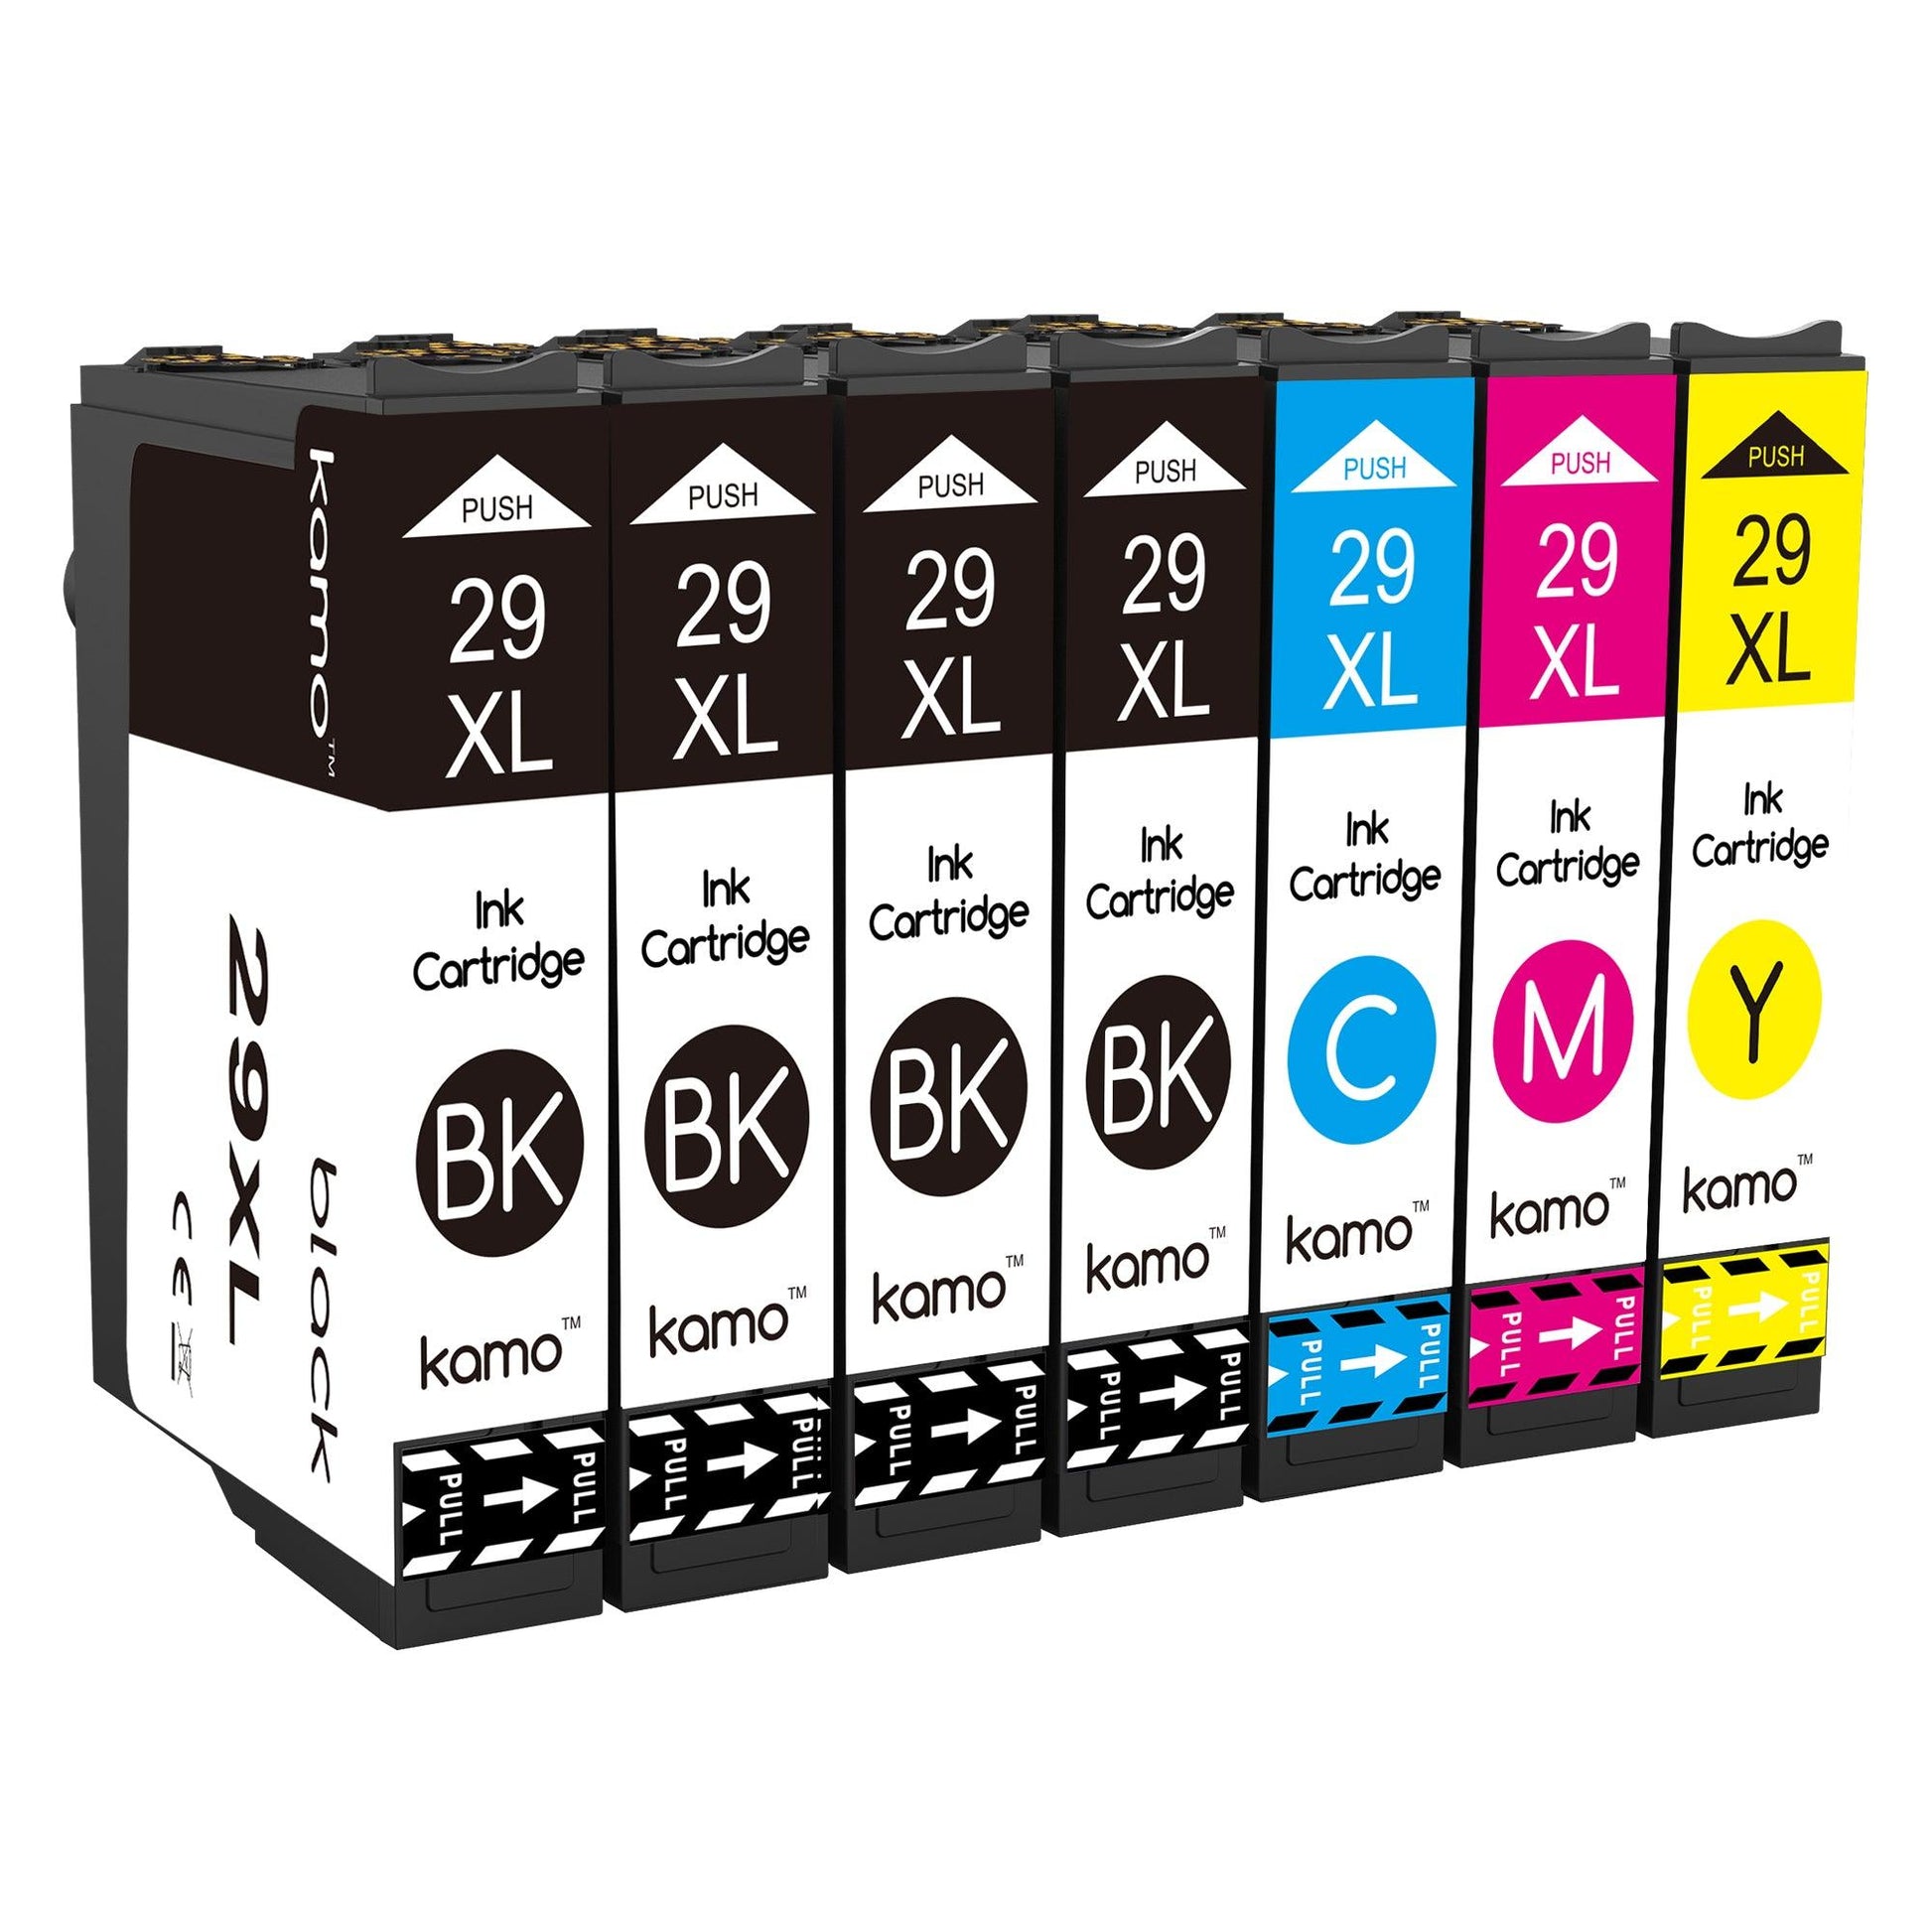 Kamo 29 XL Compatible with Epson 29 29XL Ink Cartridges